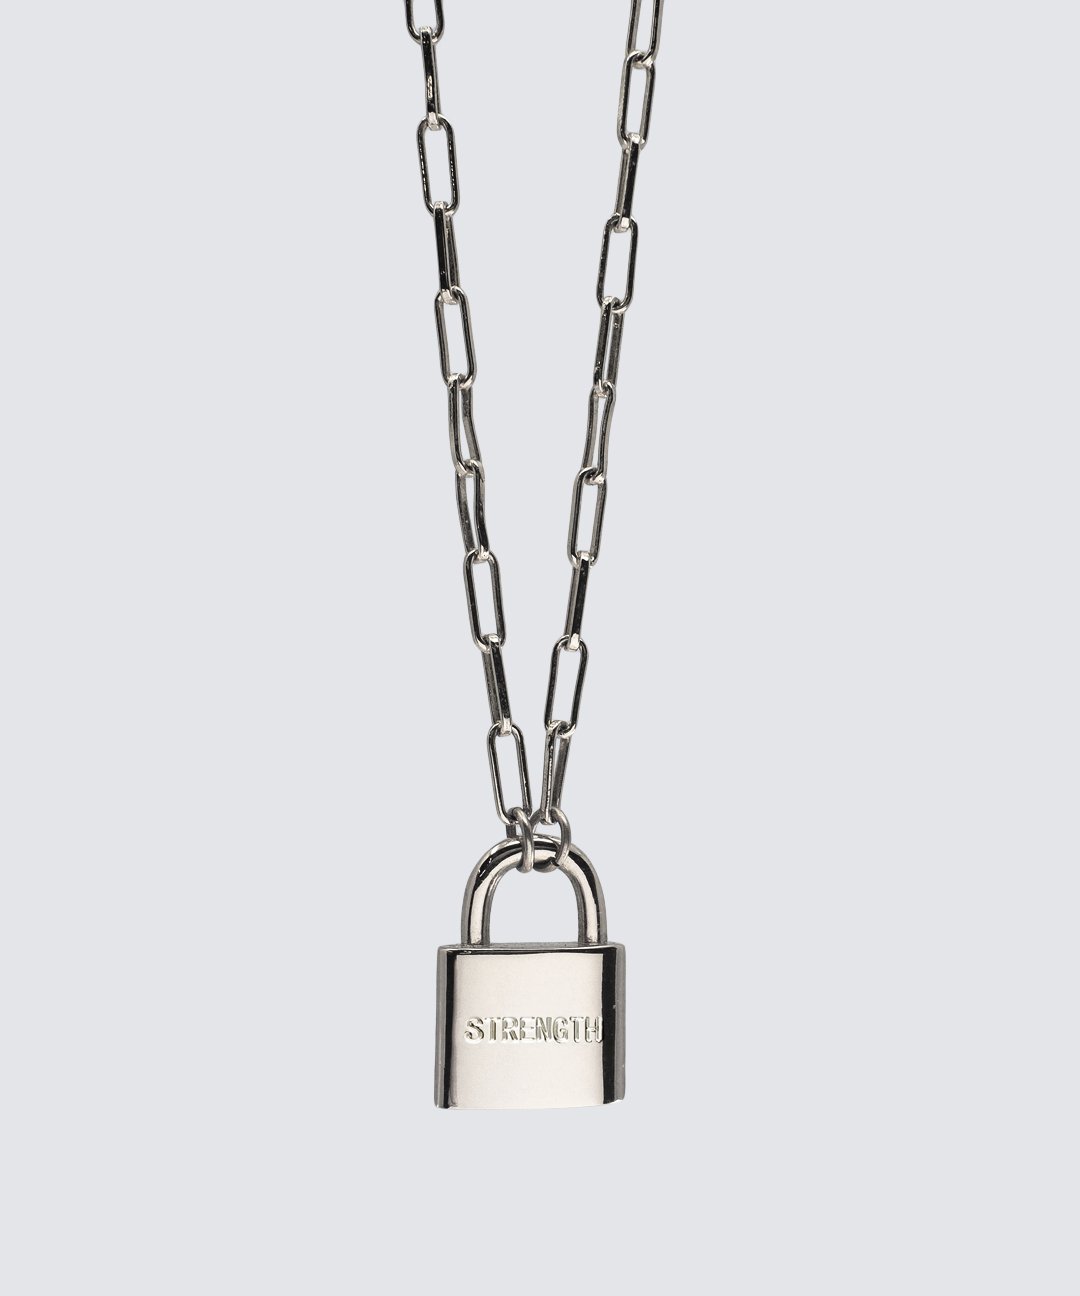 Brooklyn Padlock Necklace Necklaces The Giving Keys STRENGTH SILVER